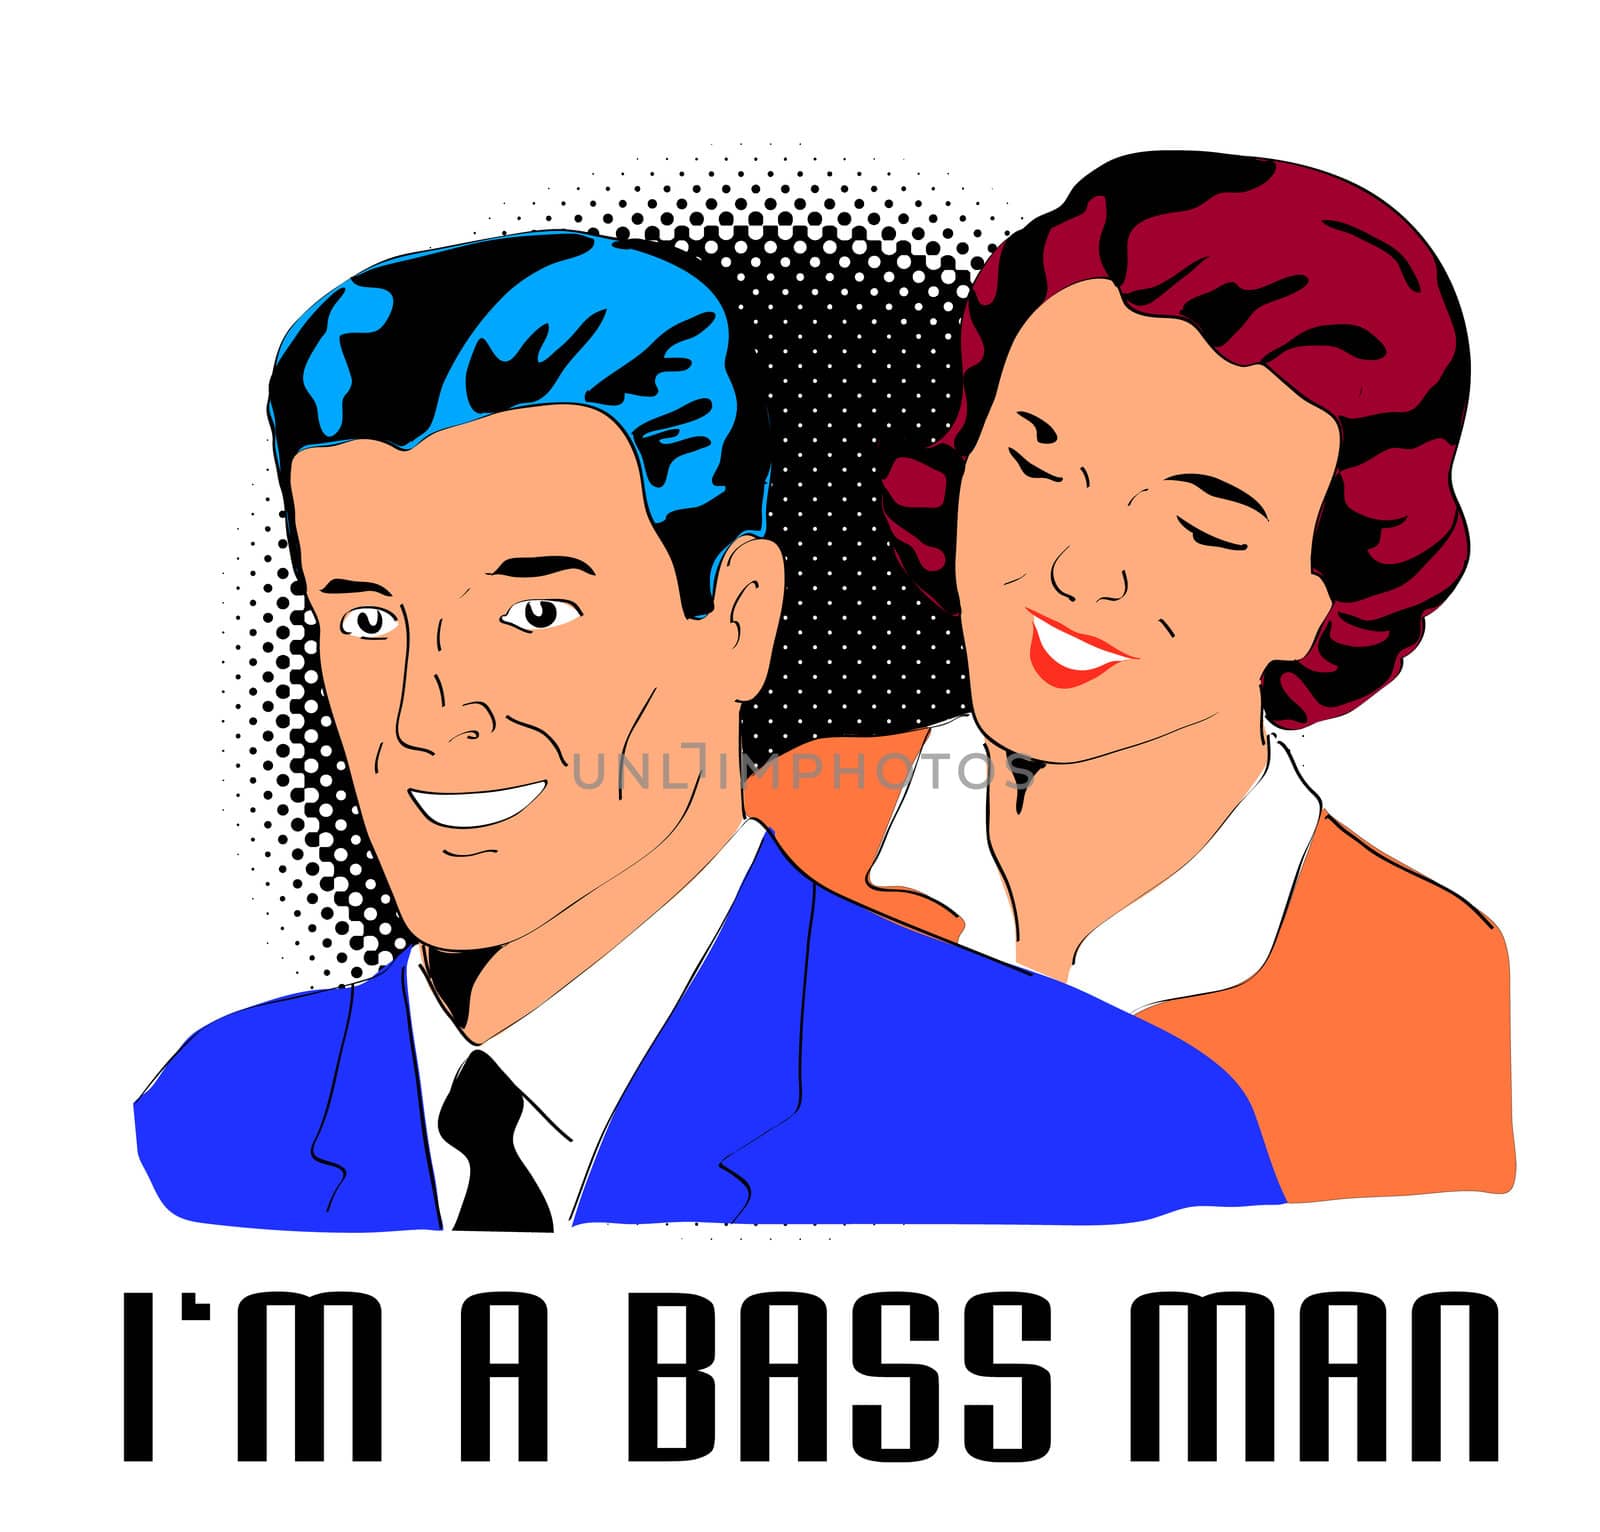 retro style illustration of a man and wife with words "i'm a bass man" with halftone dots background